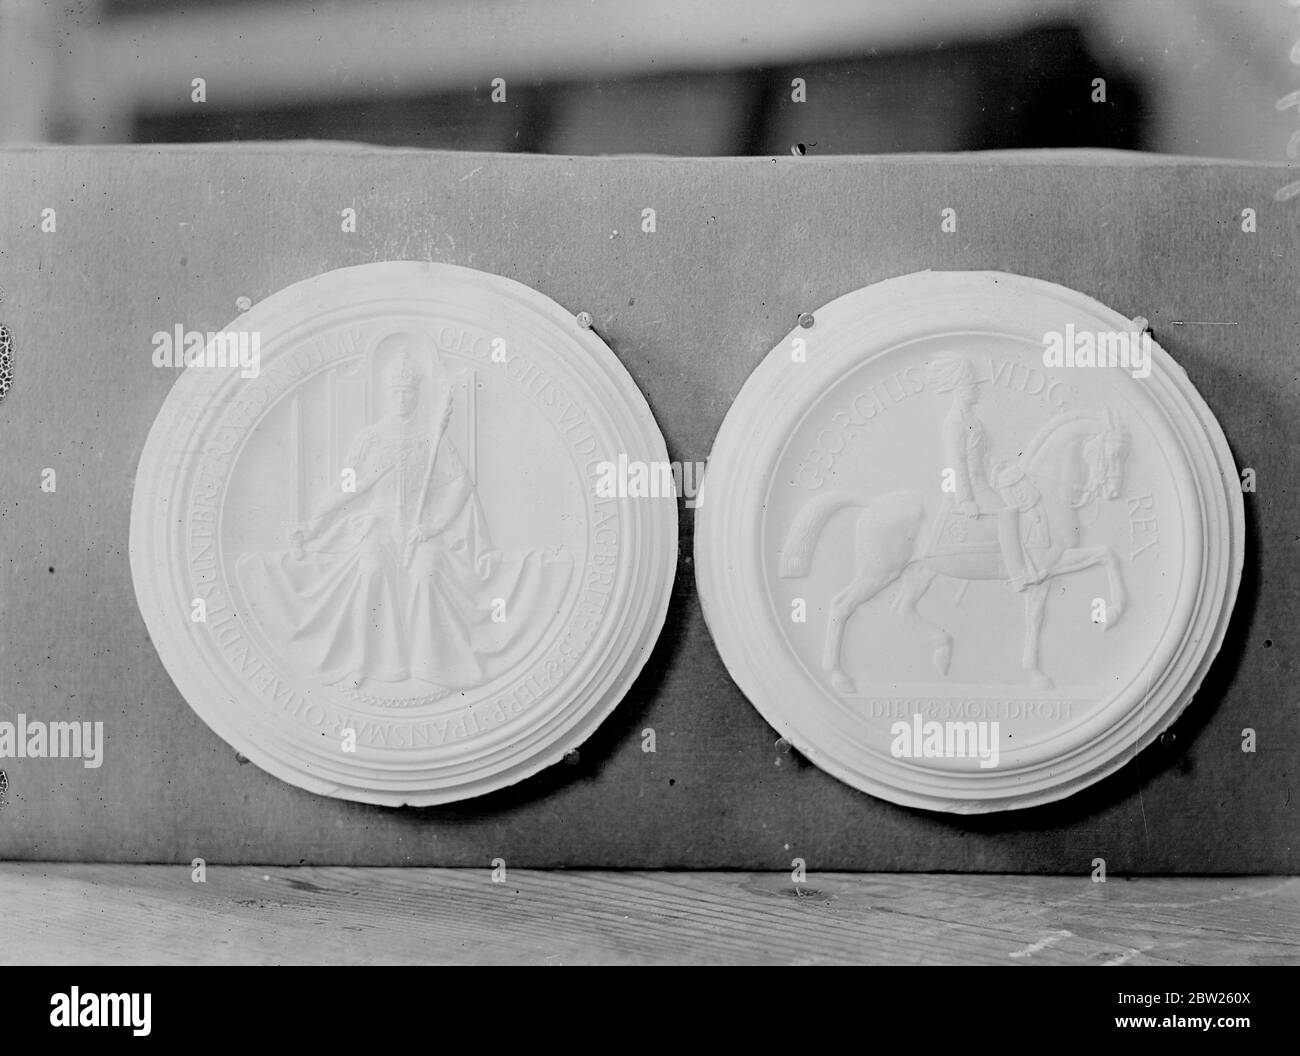 New impression for the Great Seal at Royal Mint. The new impression for the Great Seal of England was on view at the Royal Mint, London. Photo shows, the plaster impression of the Great Seal at the Royal Mint. The front is on left and the back is on right 26 February 26 1938 Stock Photo